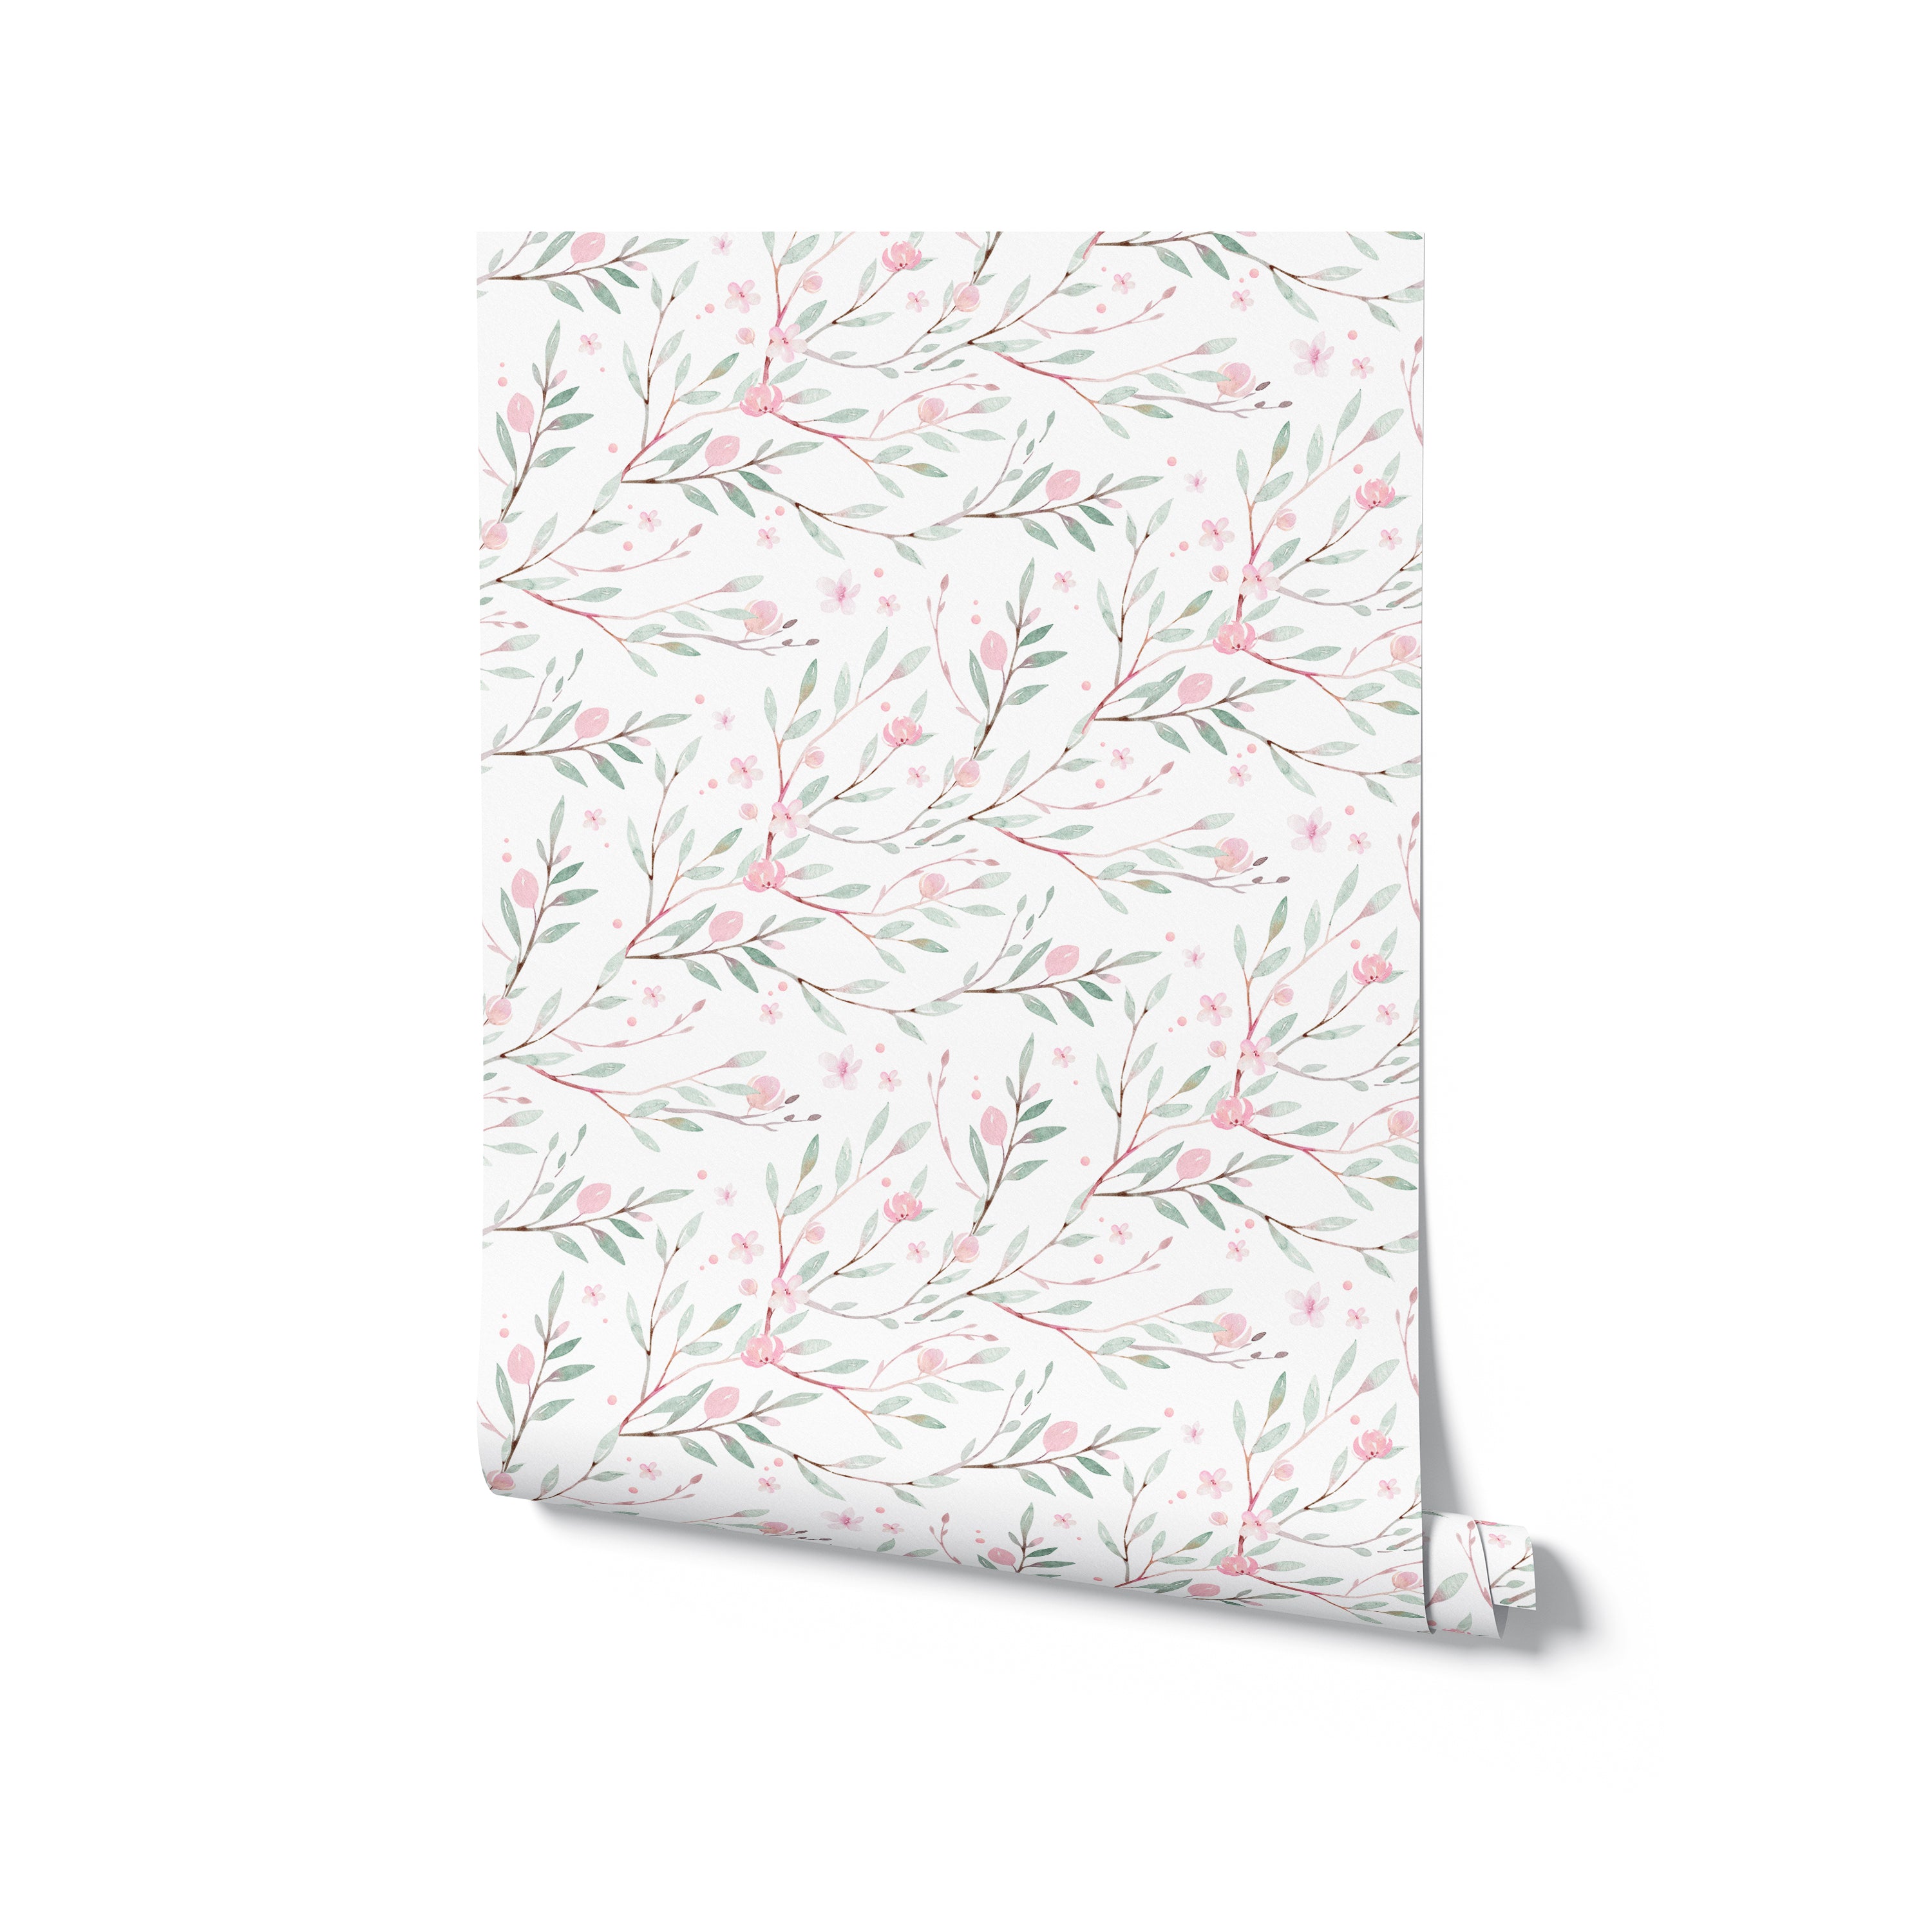 Watercolour Spring Bird Wallpaper - Multi featuring a delicate pattern of pink blossoms and soft green leaves intertwined on a light background, ideal for adding a touch of spring freshness to any room